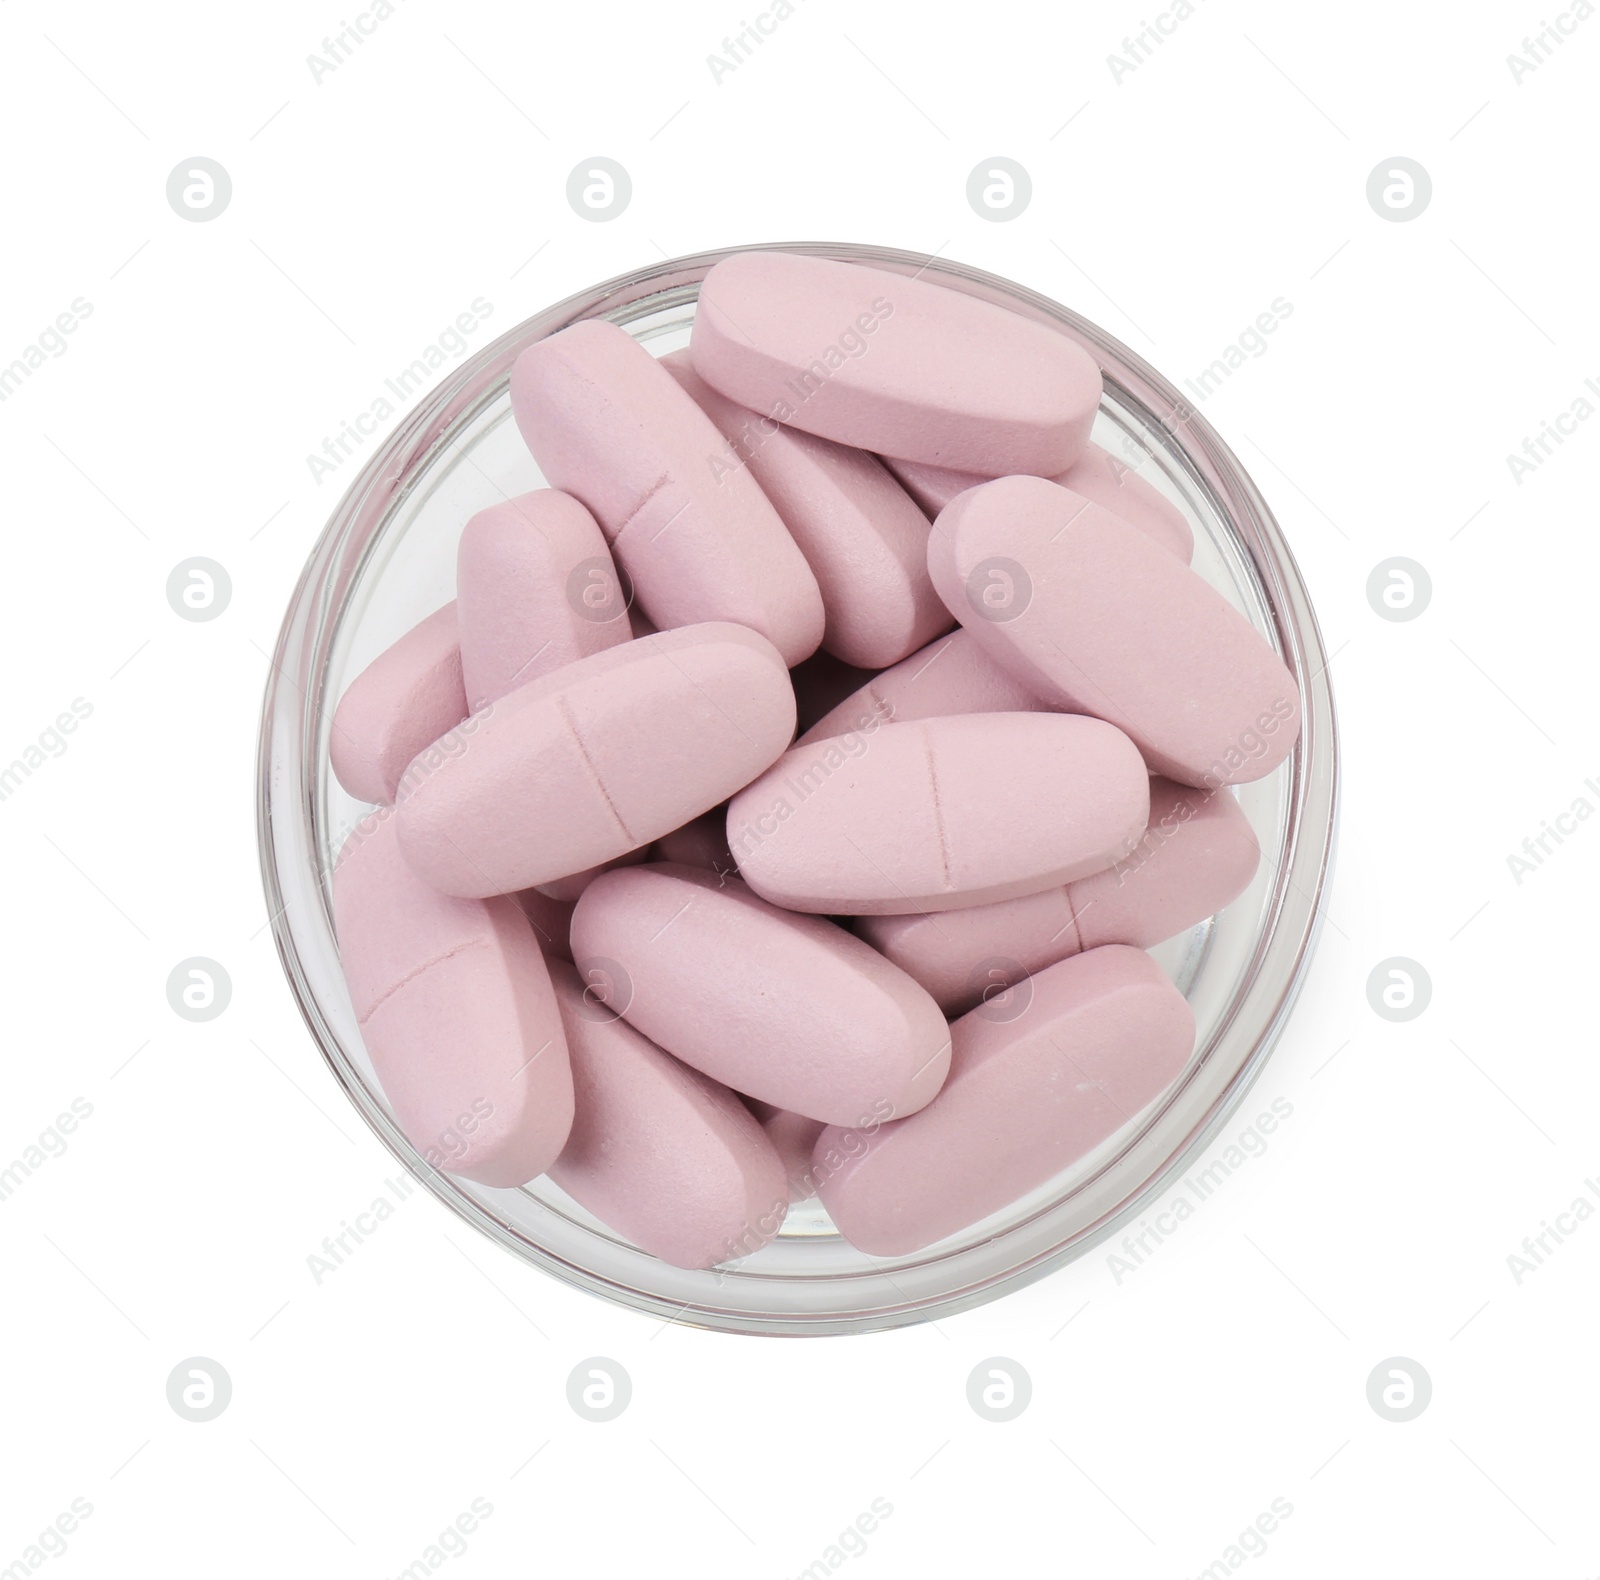 Photo of Vitamin pills in bowl isolated on white, top view. Health supplement